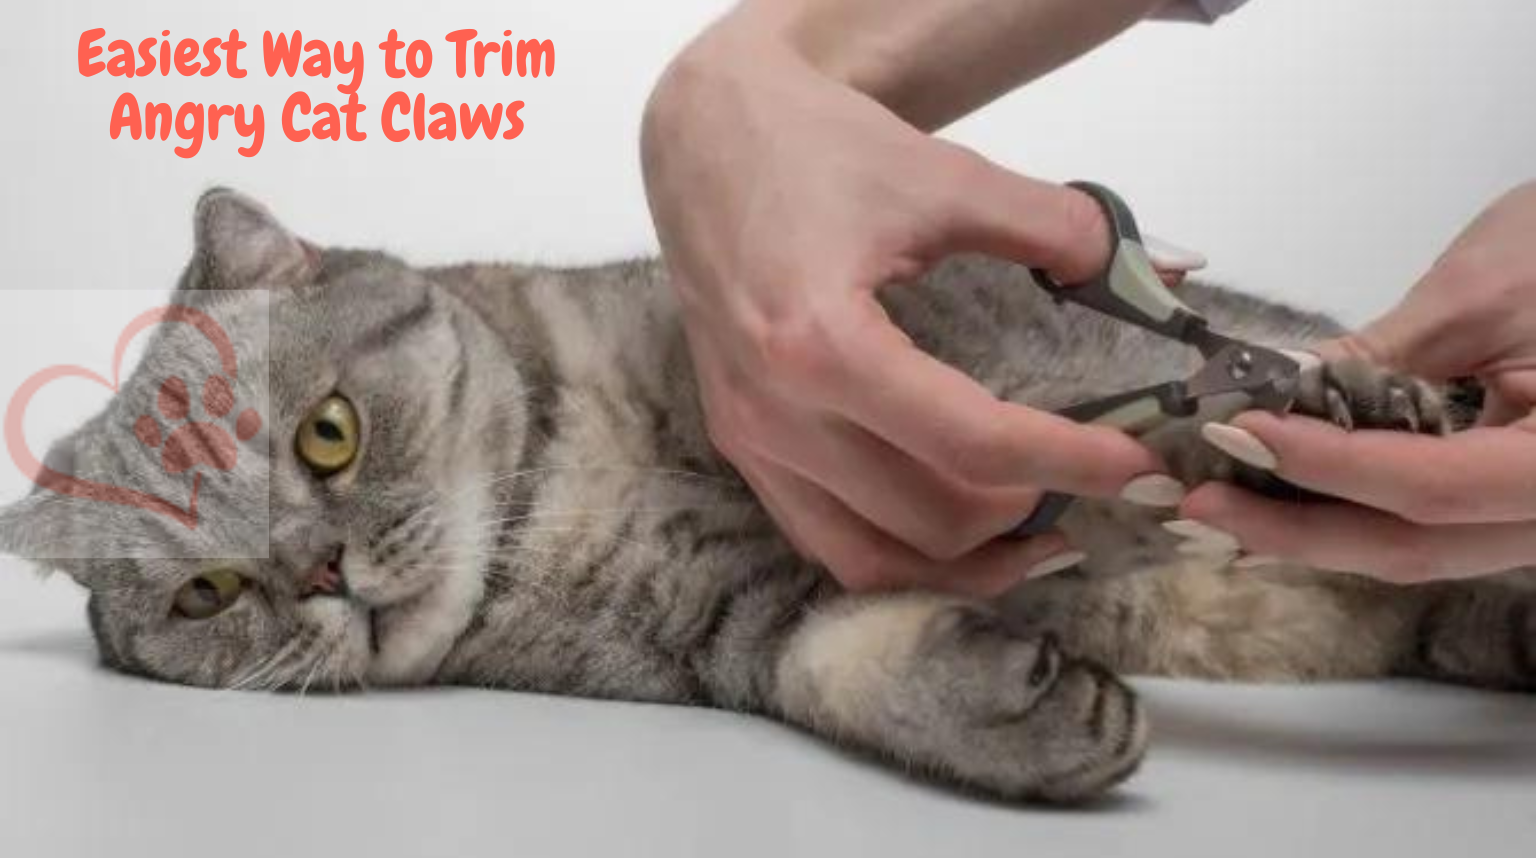 How to Trim Angry Cat Claws